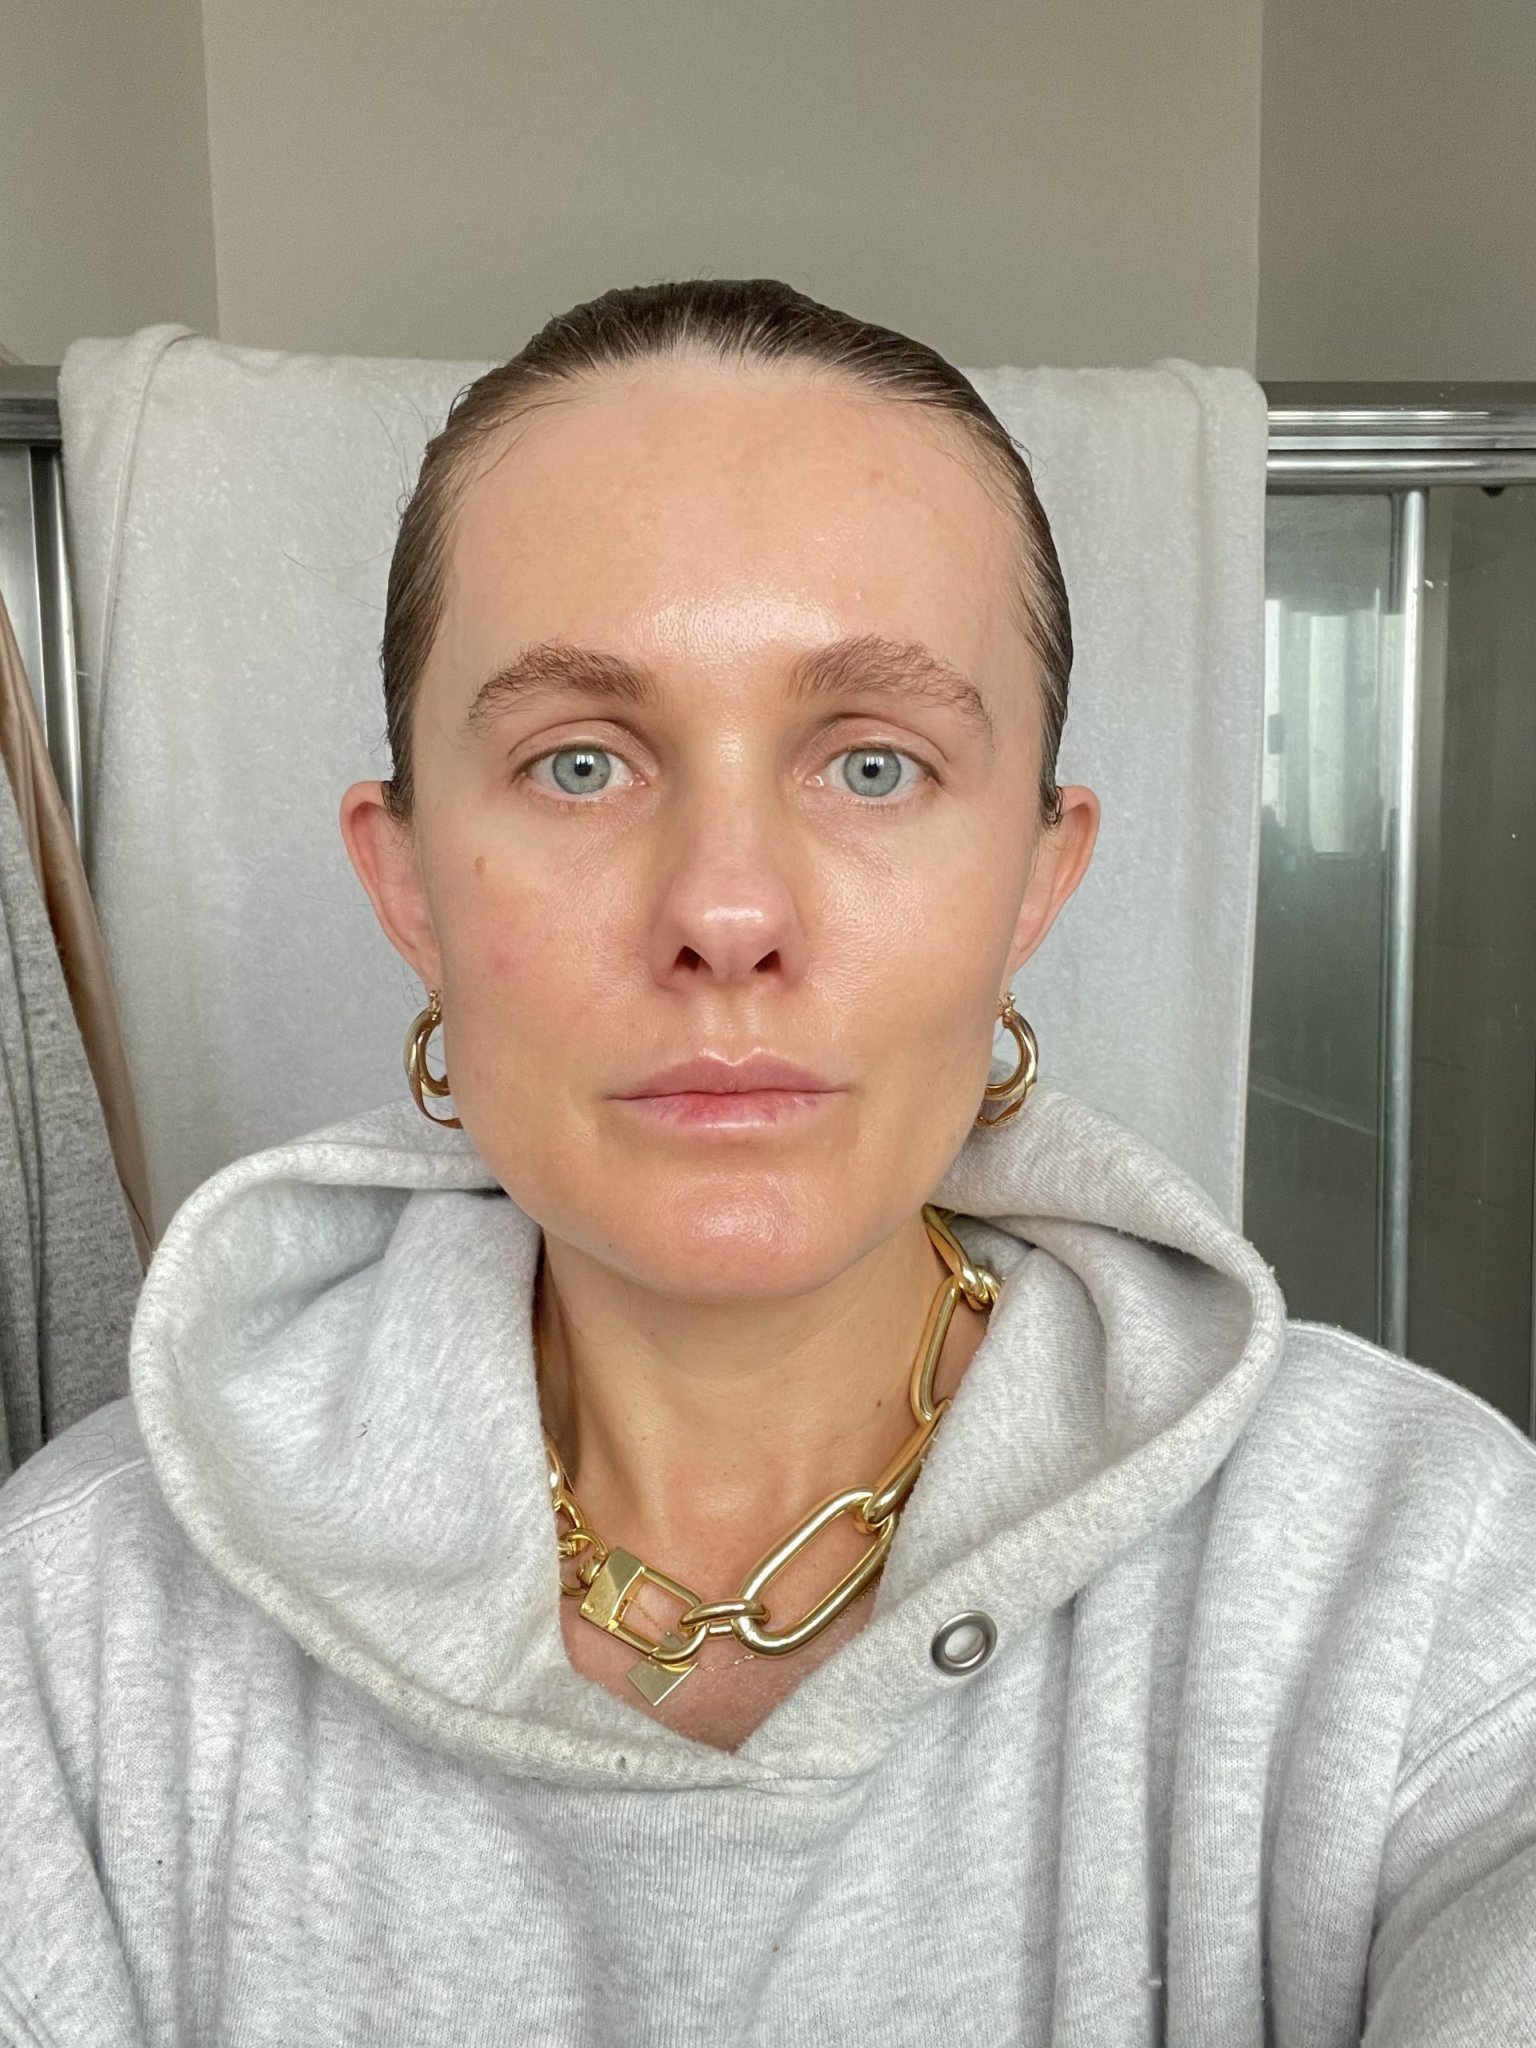 I Had Microneedling With PRP and It Was a Total Gamechanger—Here's What You Need to Know